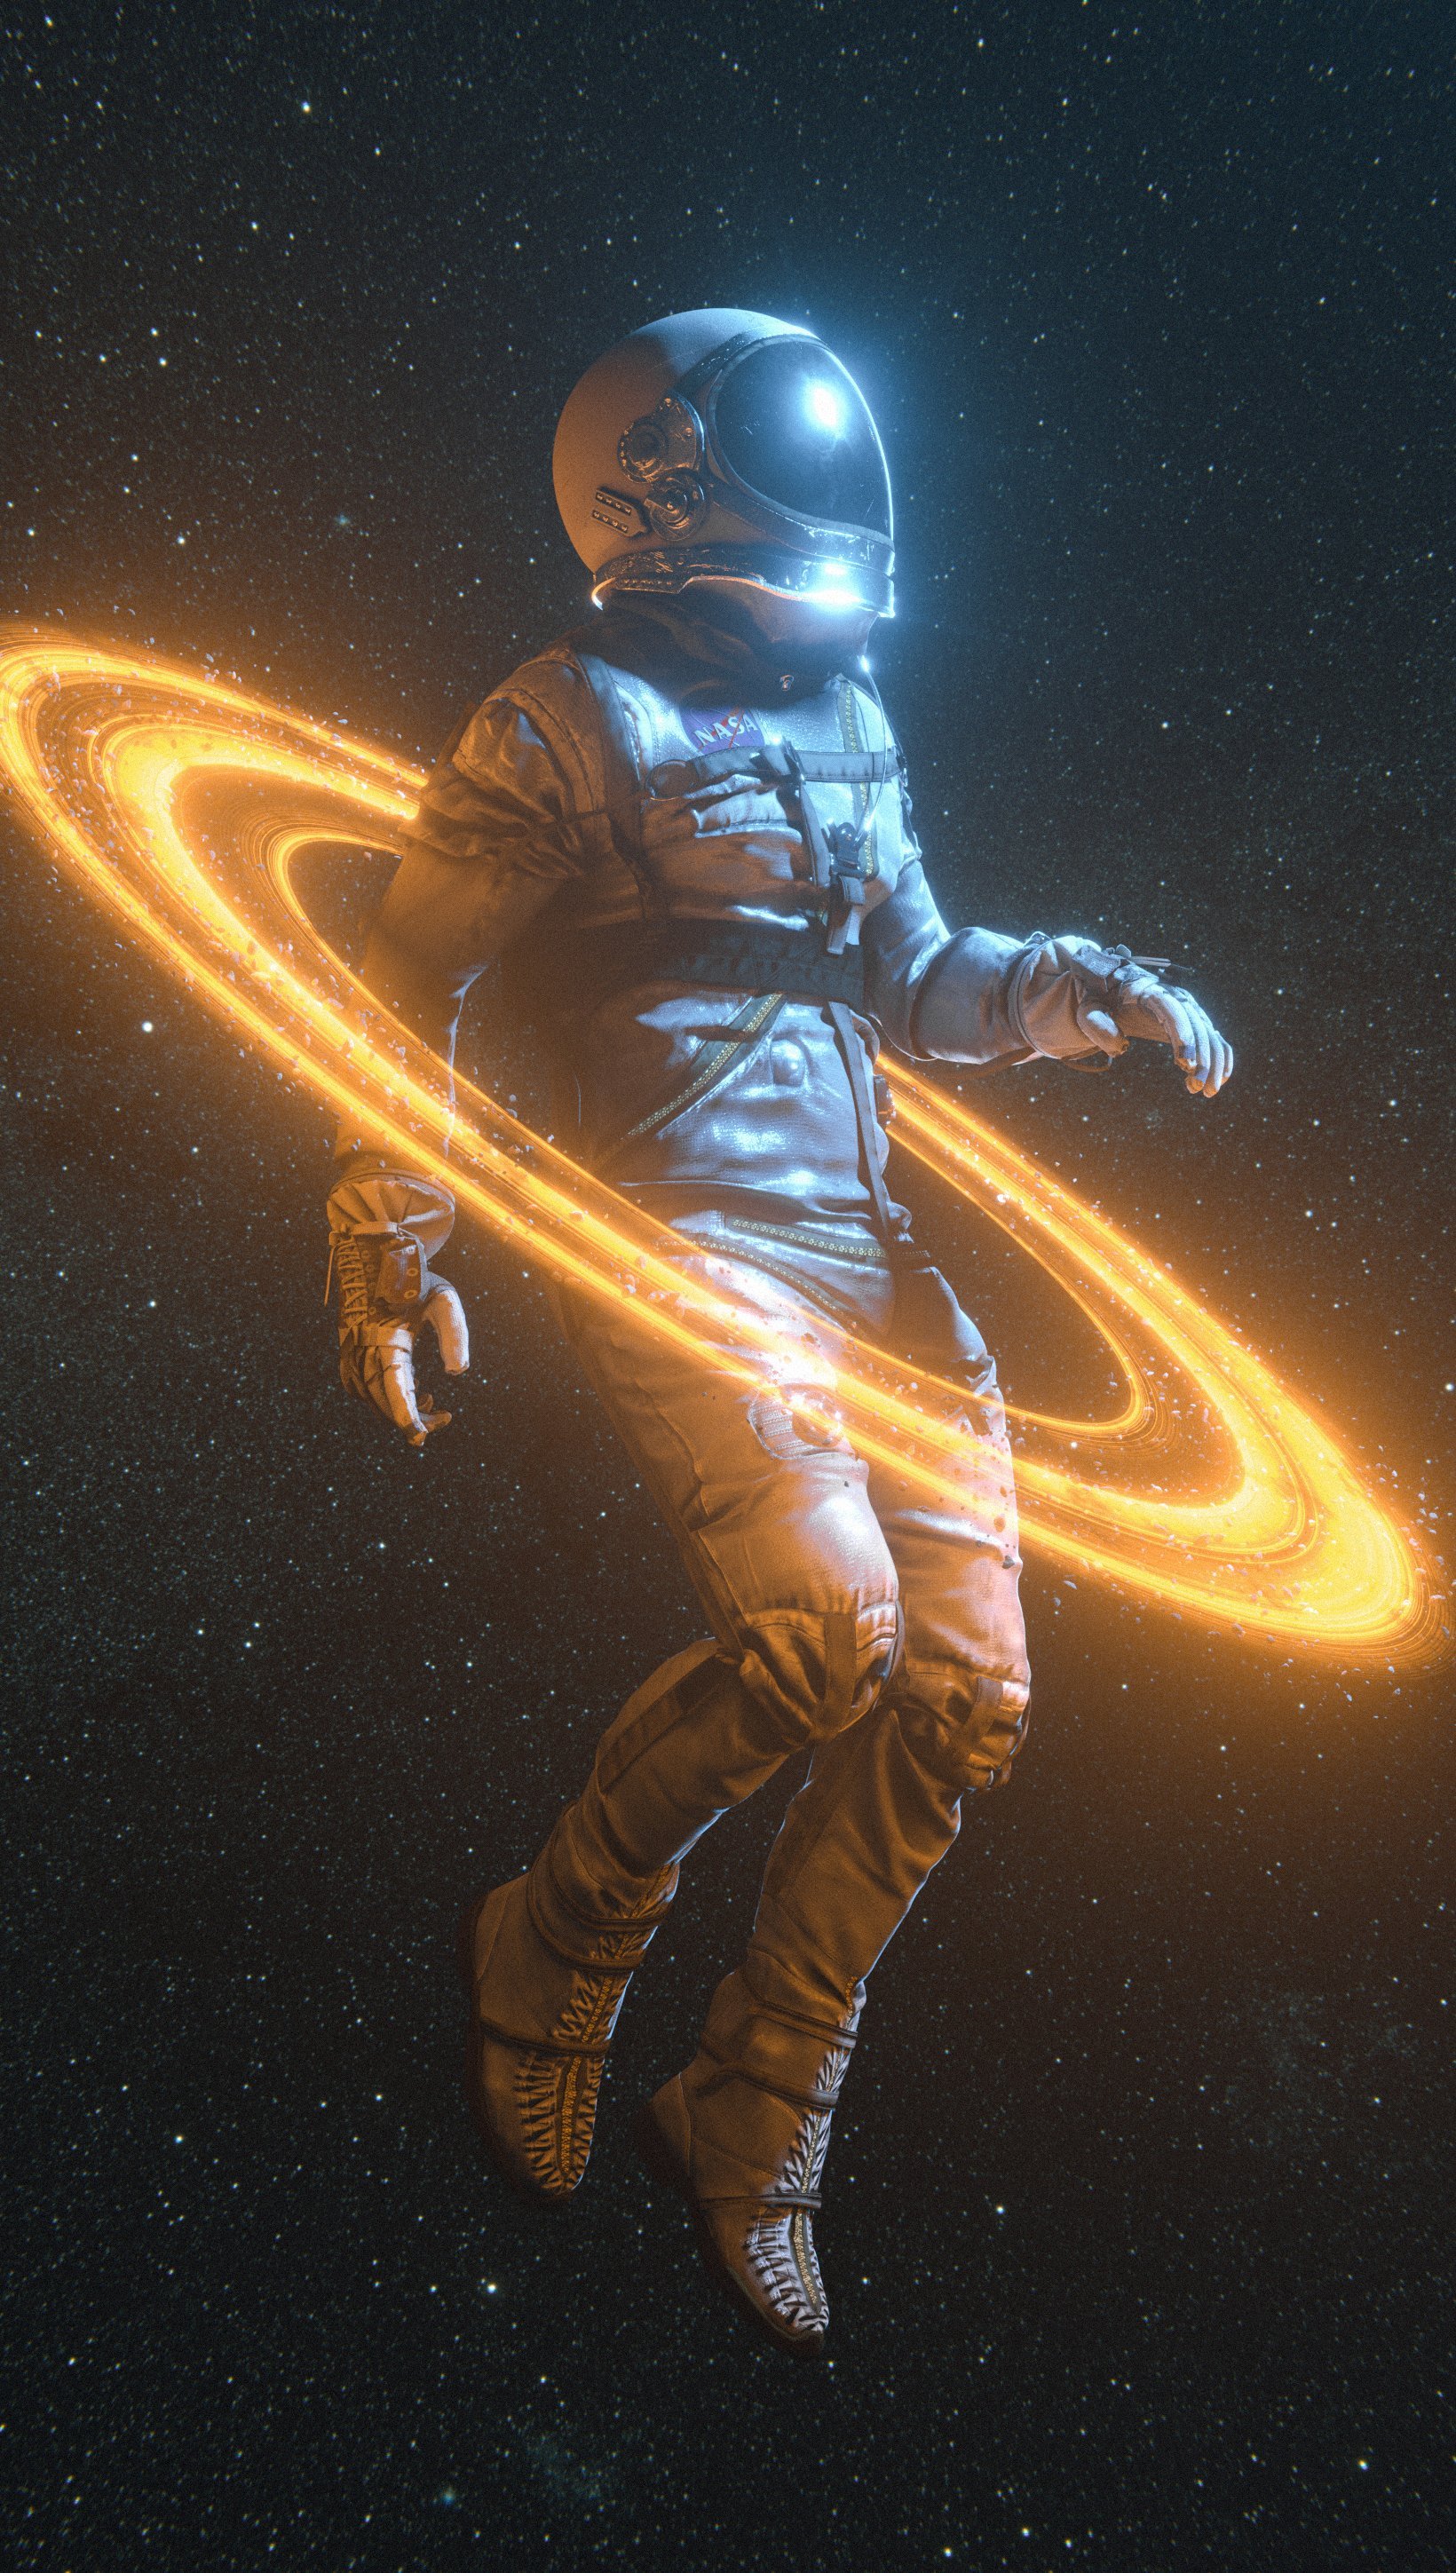 Astronaut surrounded by rings Wallpaper